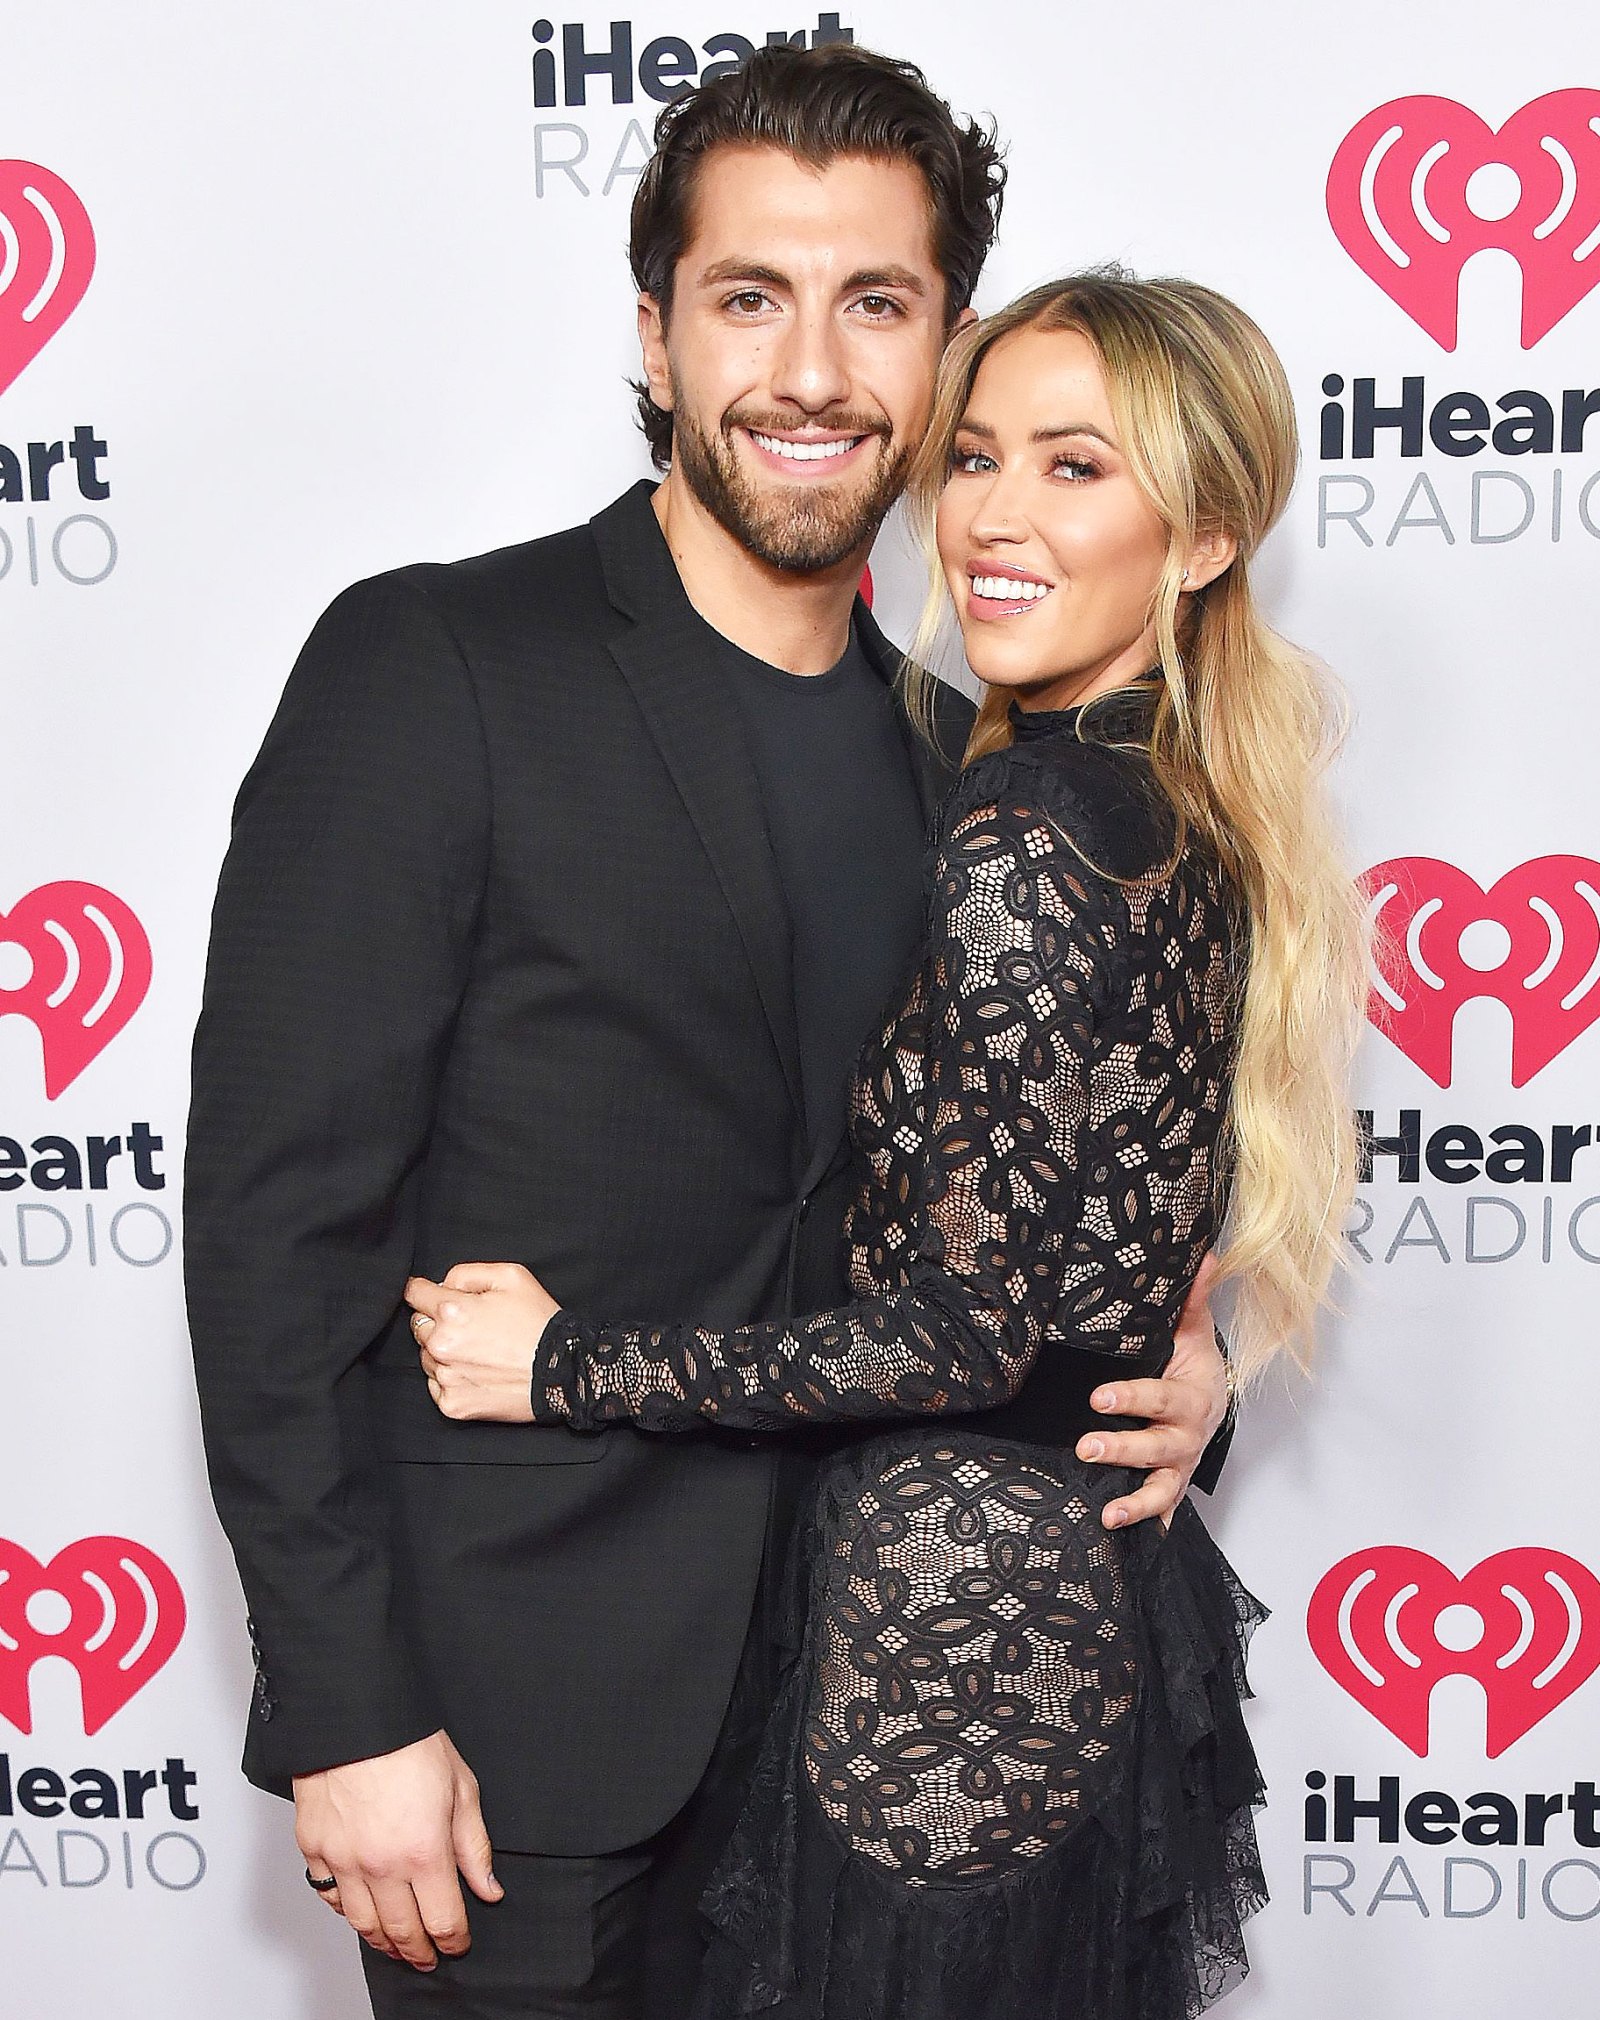 Kaitlyn Bristowe and Jason Tartick Bachelor Nation Couples Who Are Still Going Strong